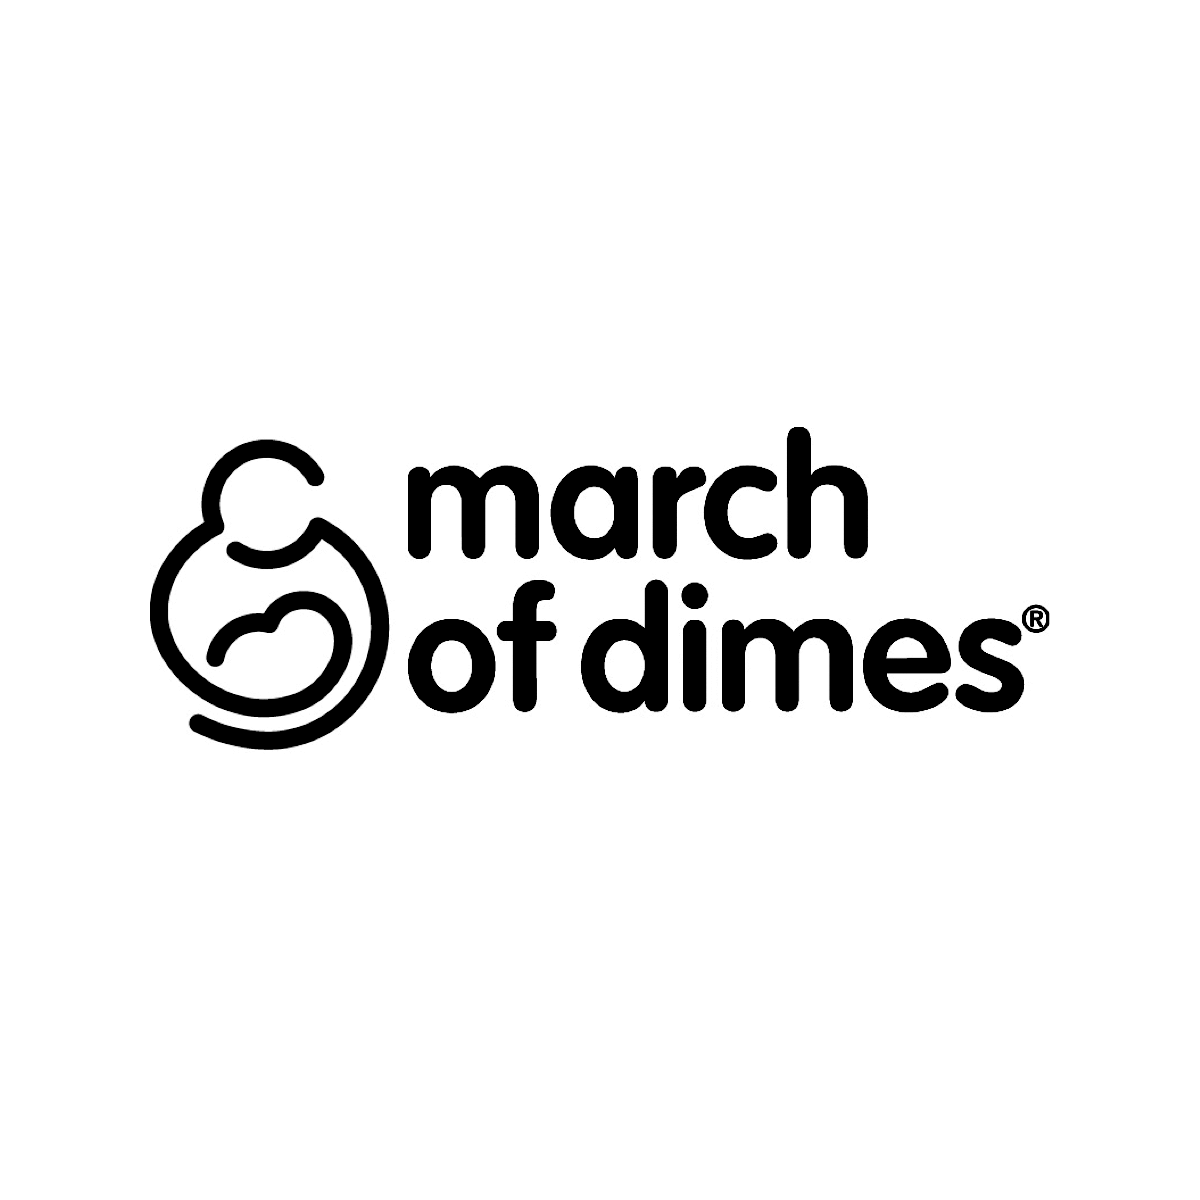 March of Dimes logo.png